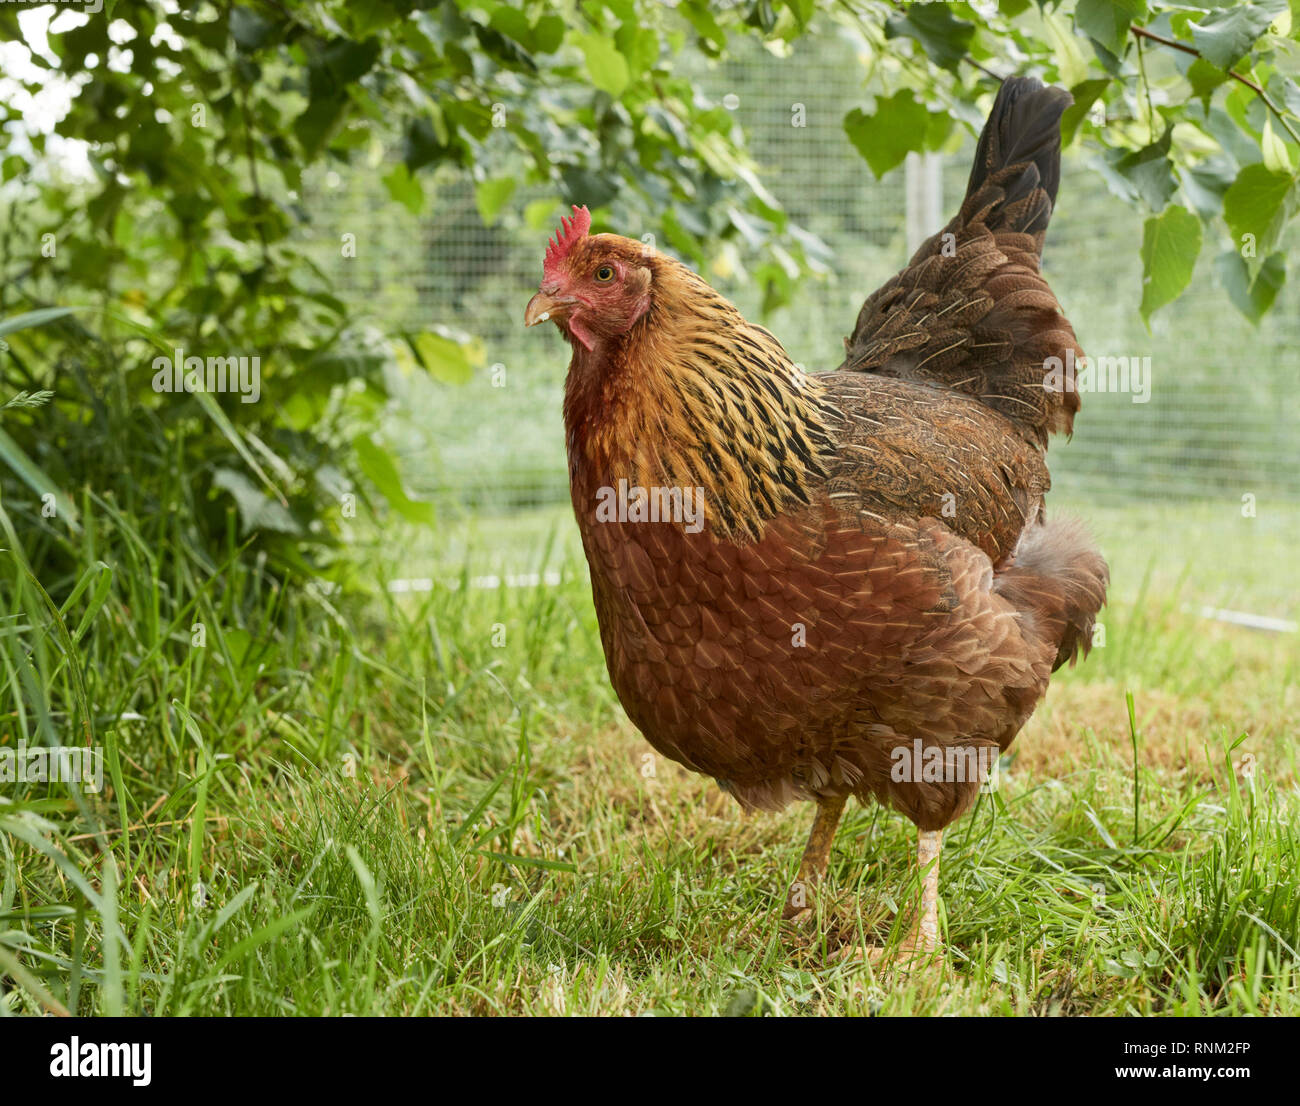 Welsummer Chicken. Hen in a chicken-run with a Lime Tree for sun and rain shelter. Germany. Stock Photo